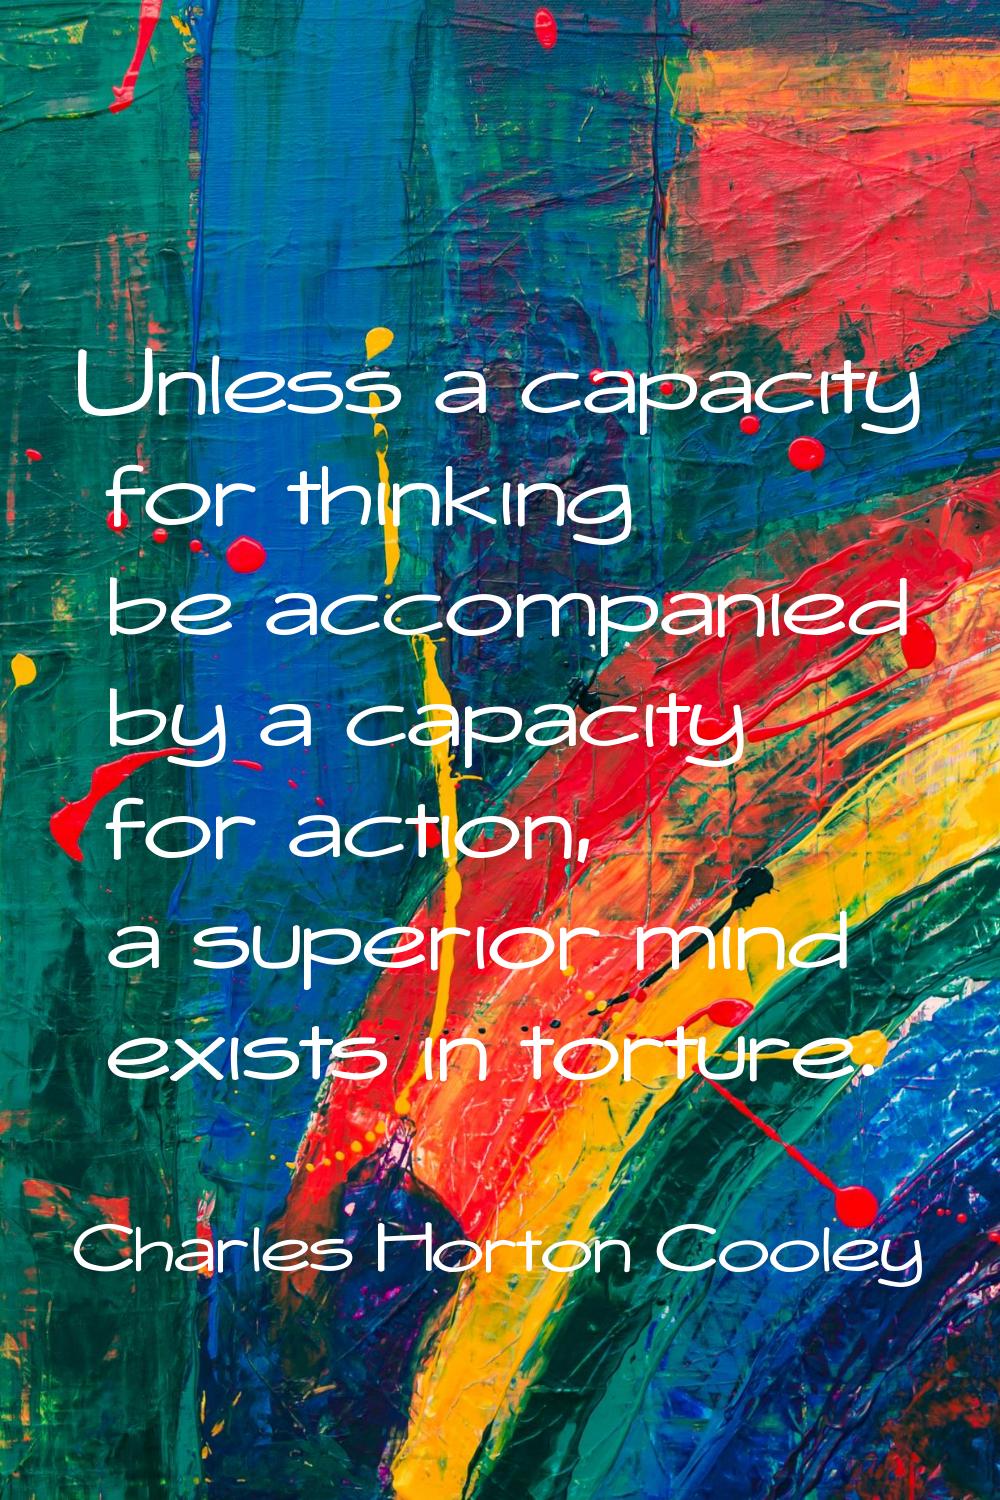 Unless a capacity for thinking be accompanied by a capacity for action, a superior mind exists in t